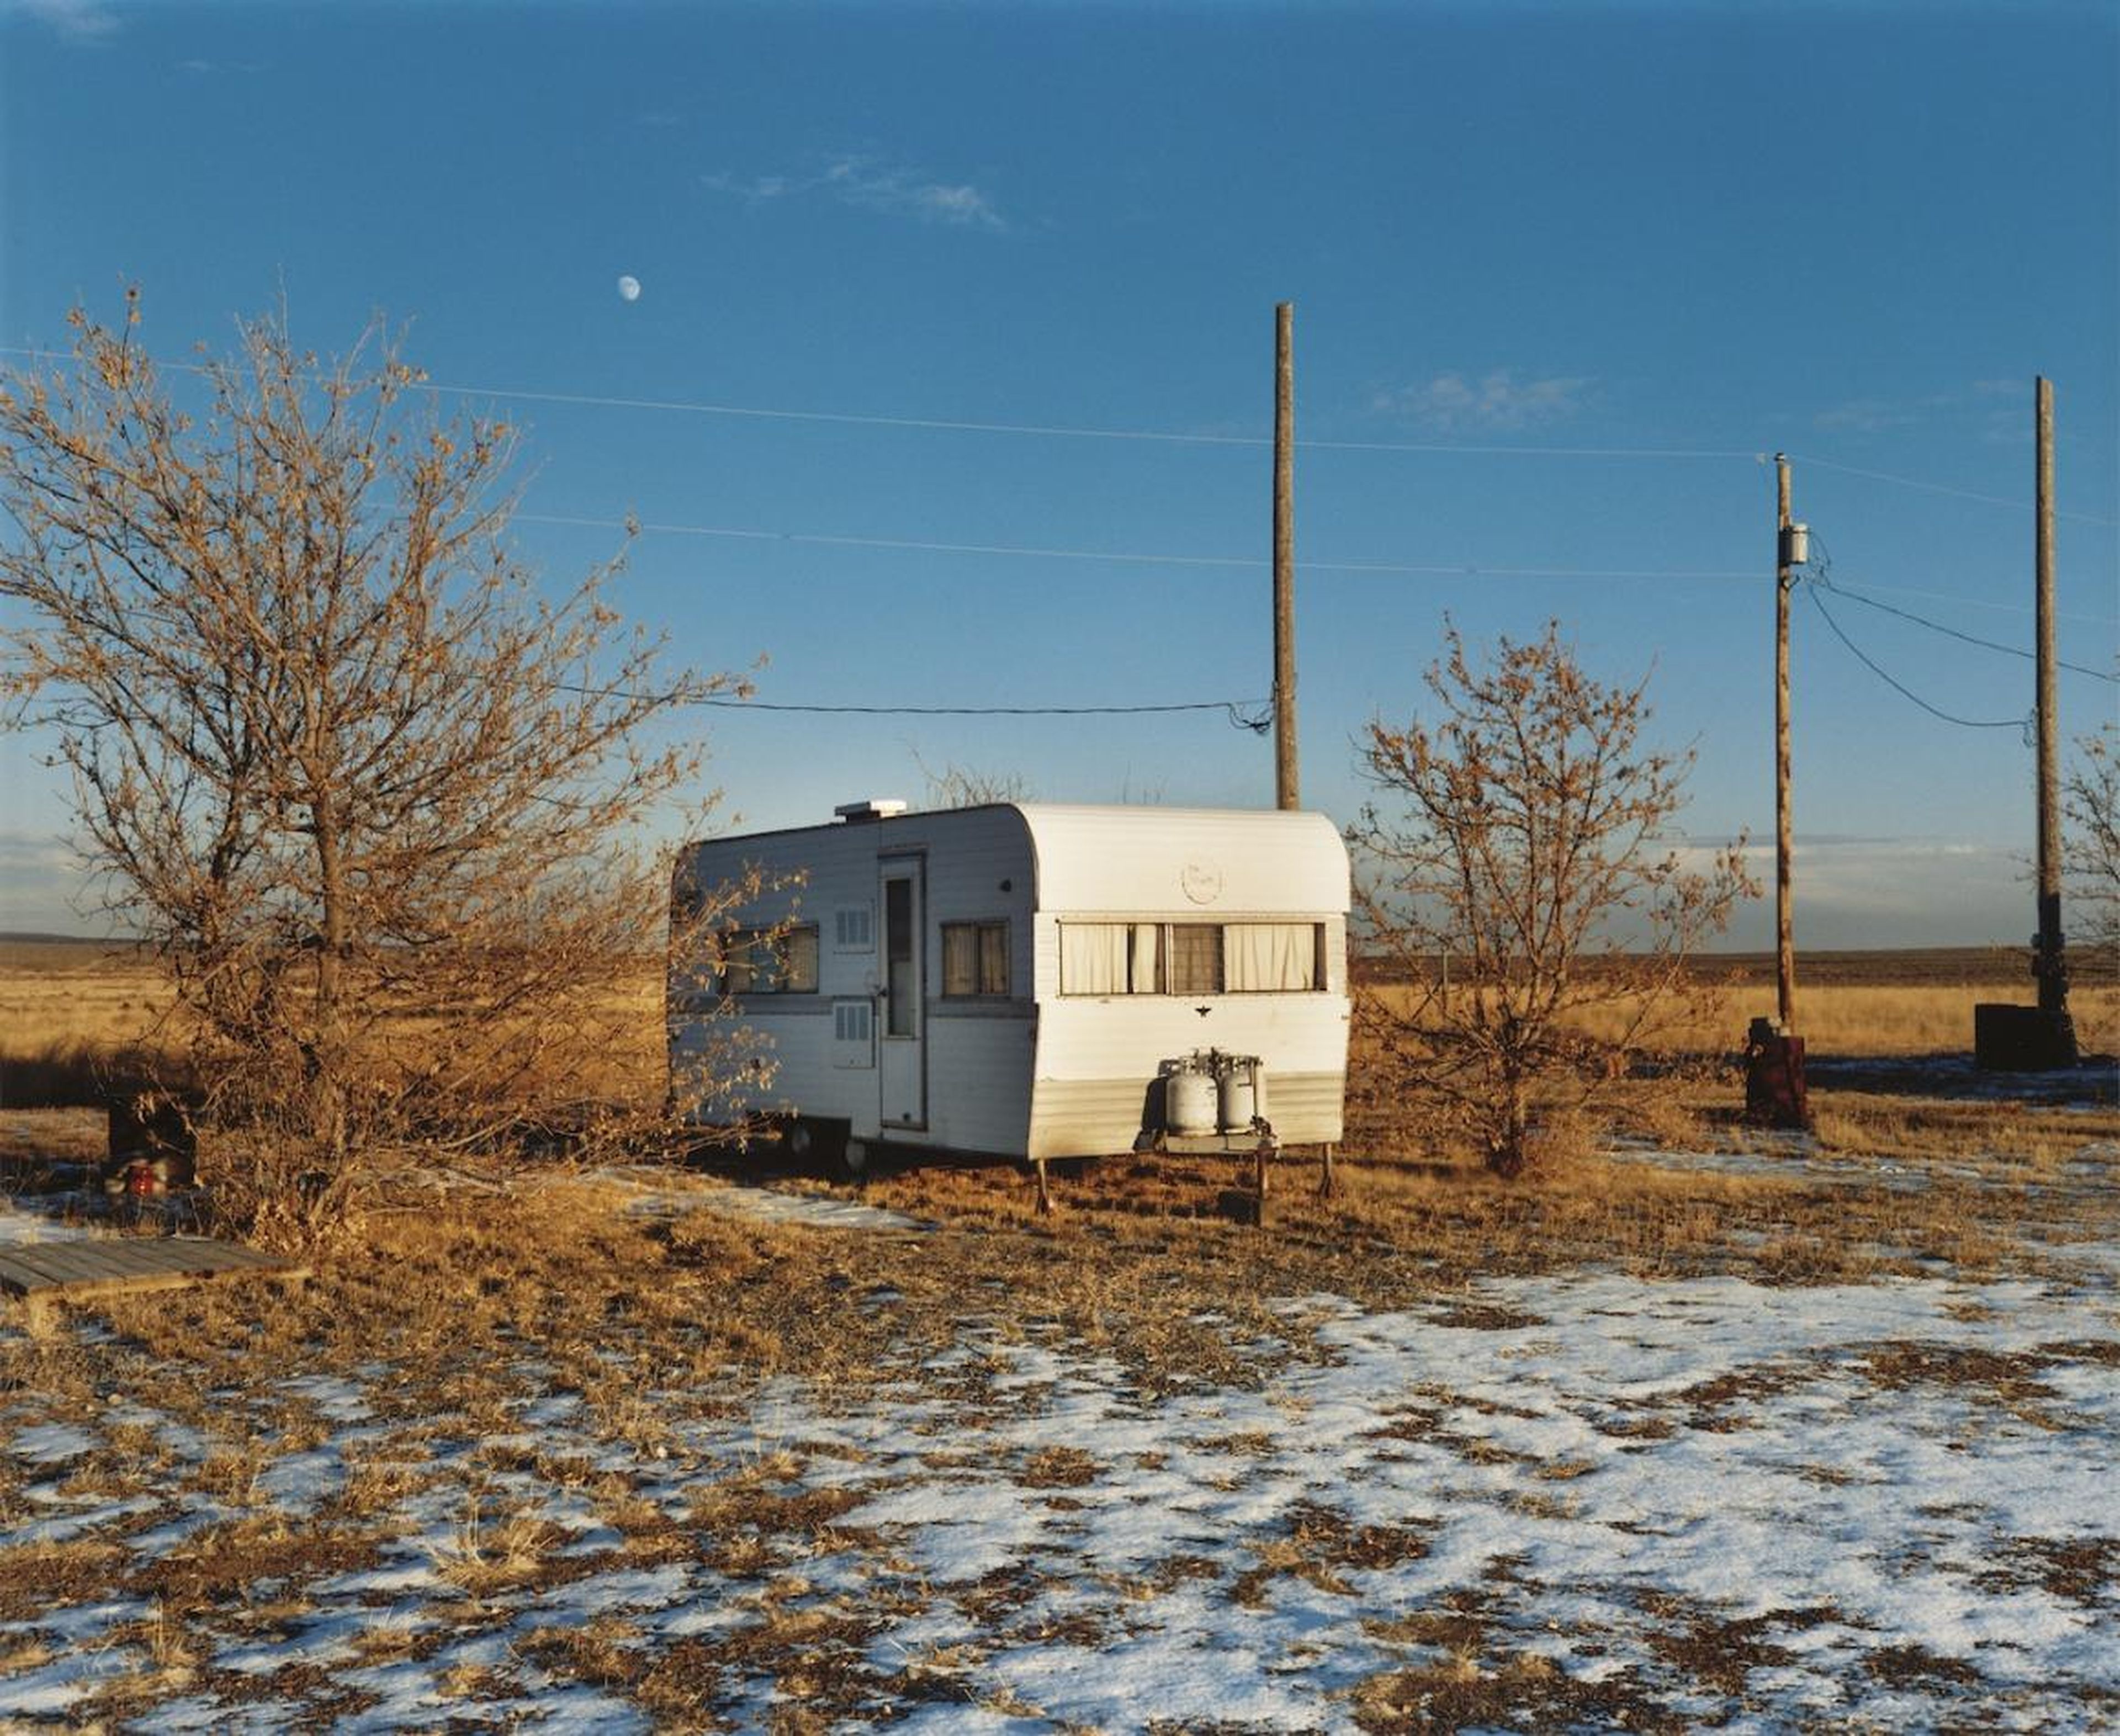 A trailer captured by Hanson in Atomic City.